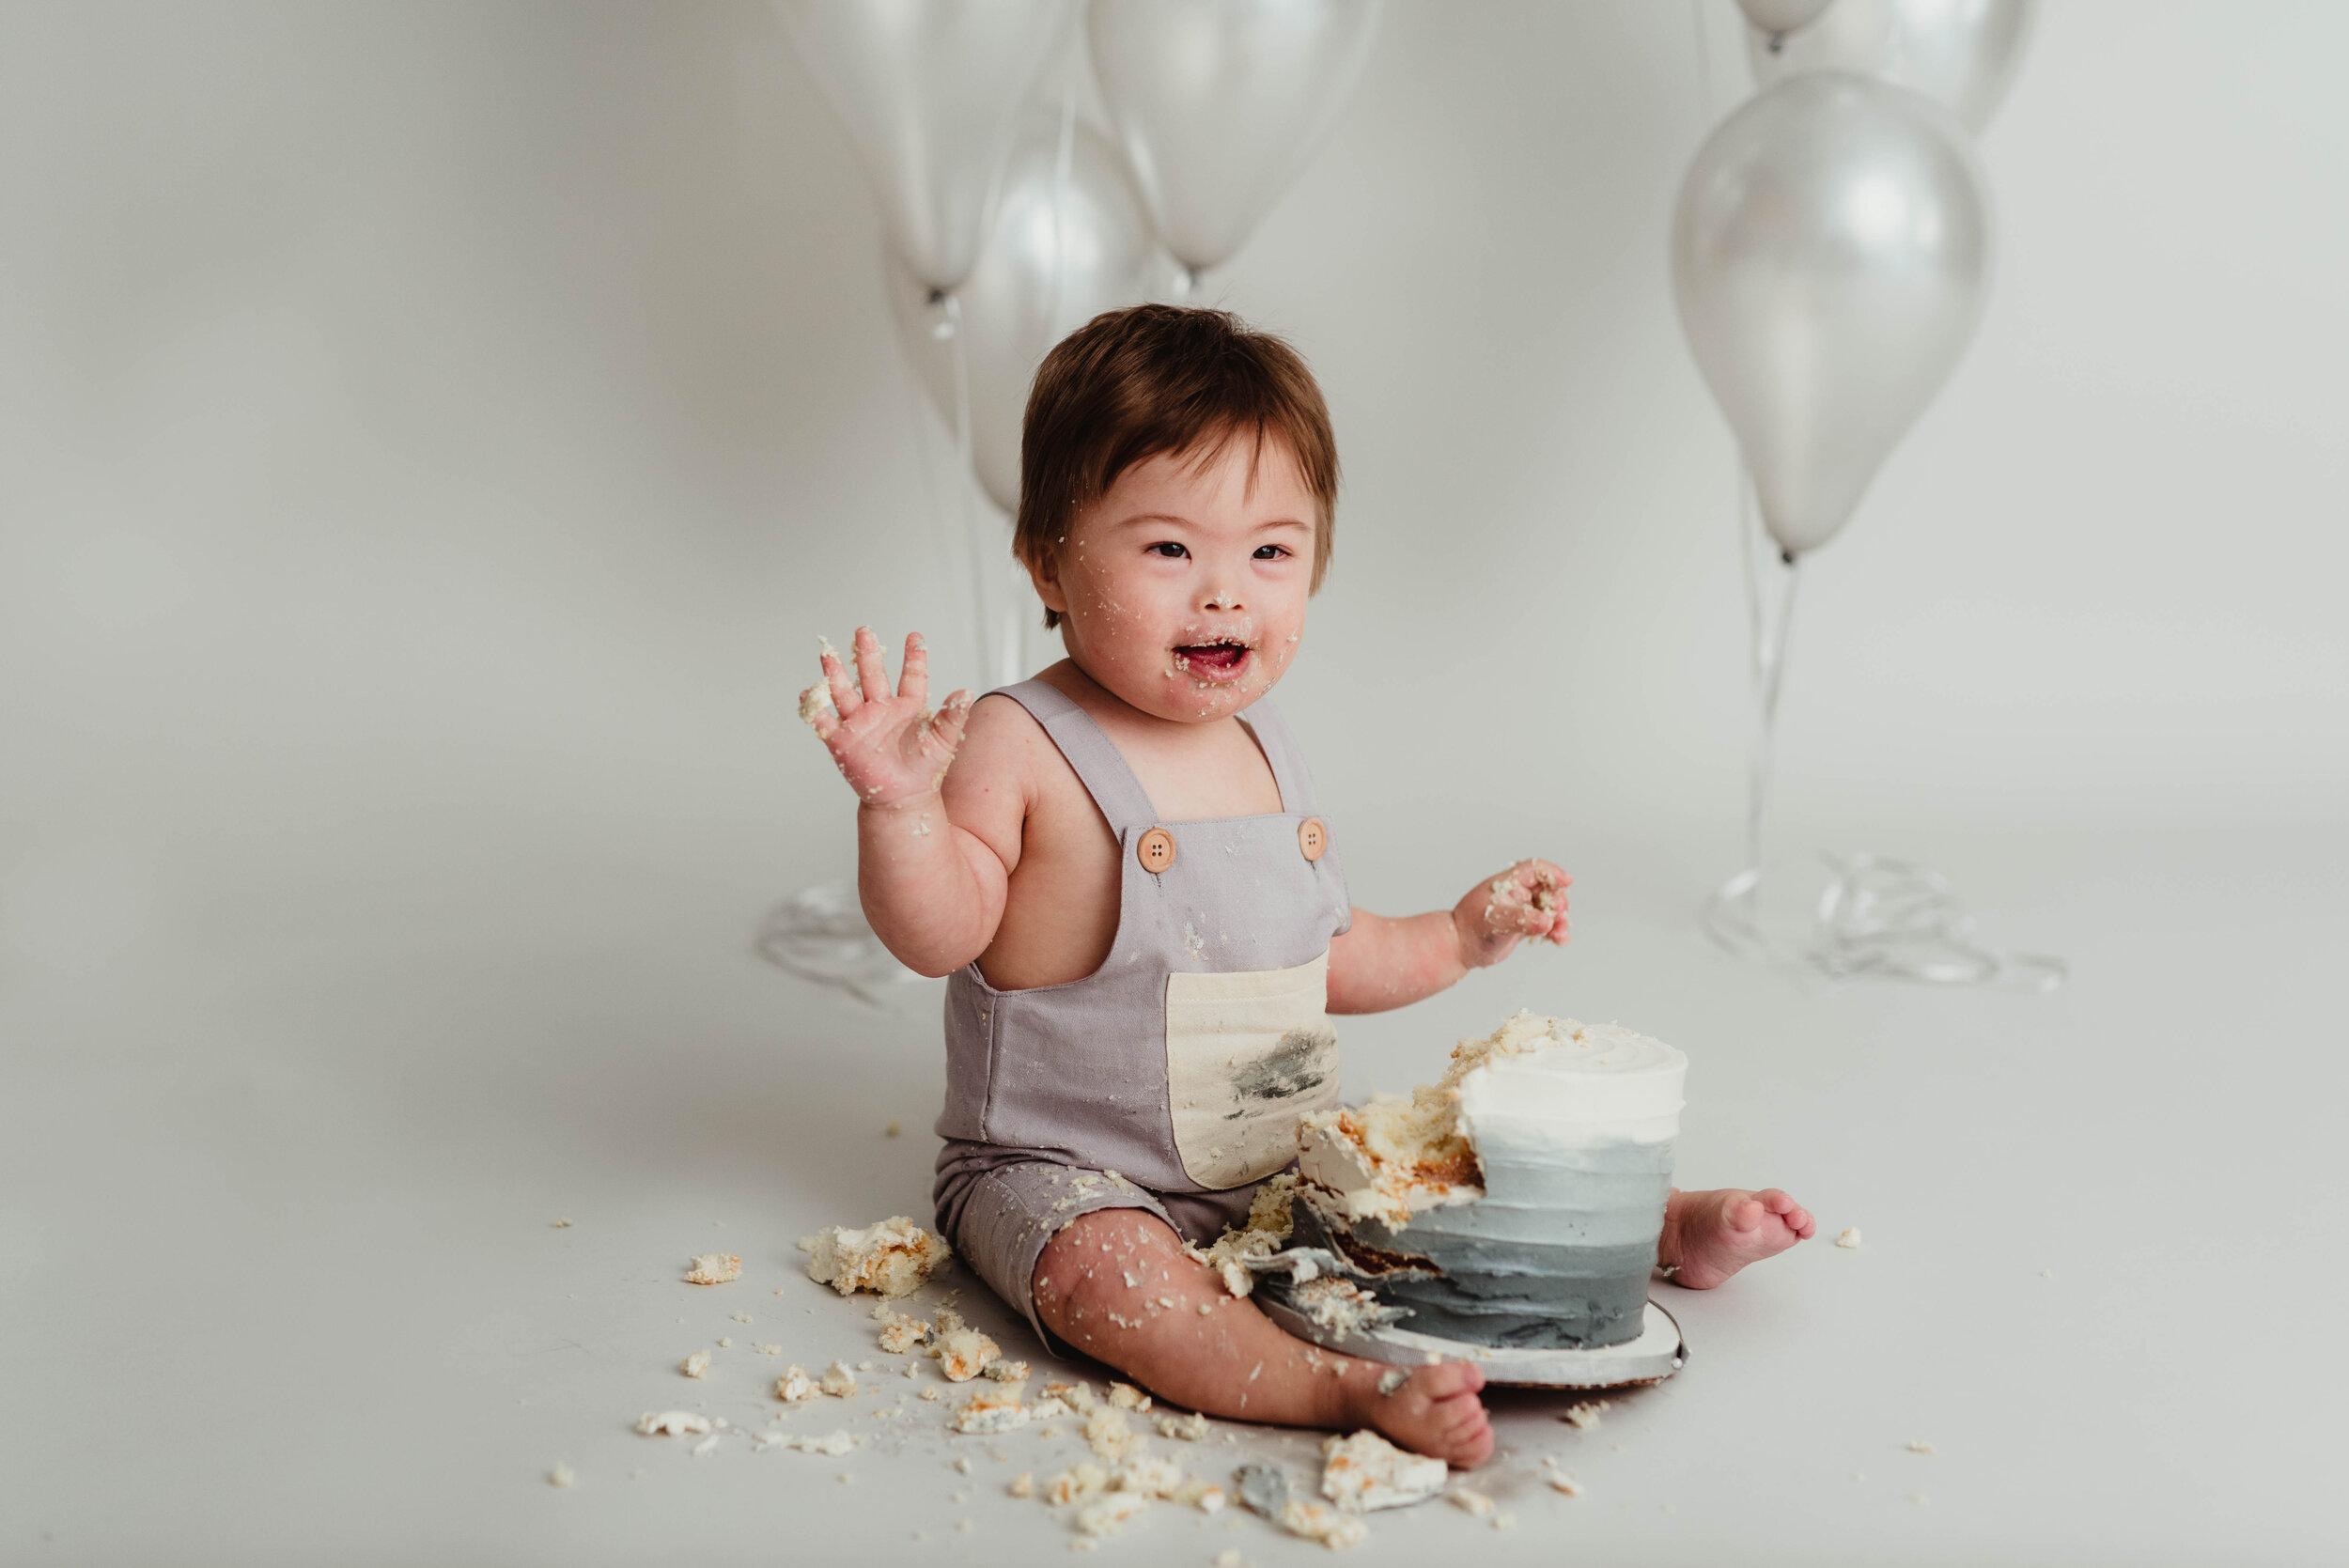 what should I do for my son's first birthday cake smash?